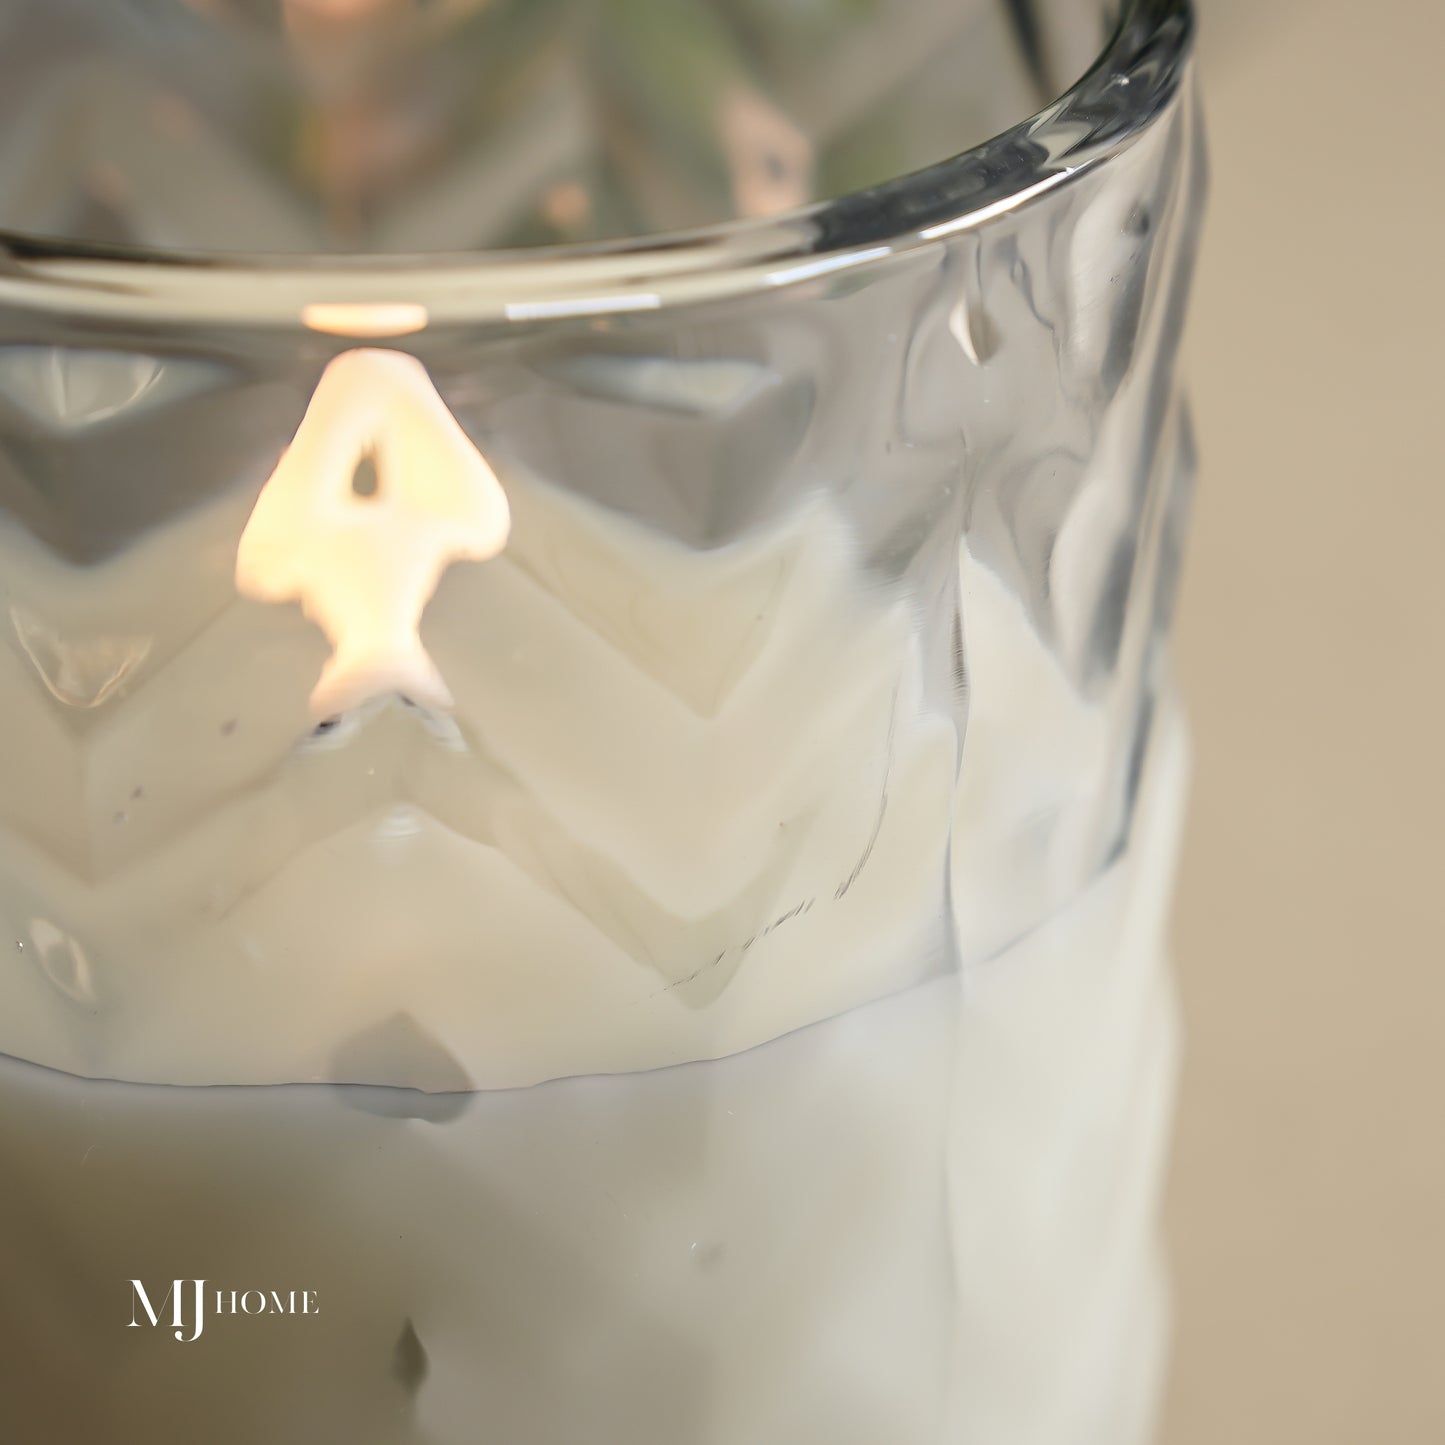 Grey Chevron Glass Flameless Candle